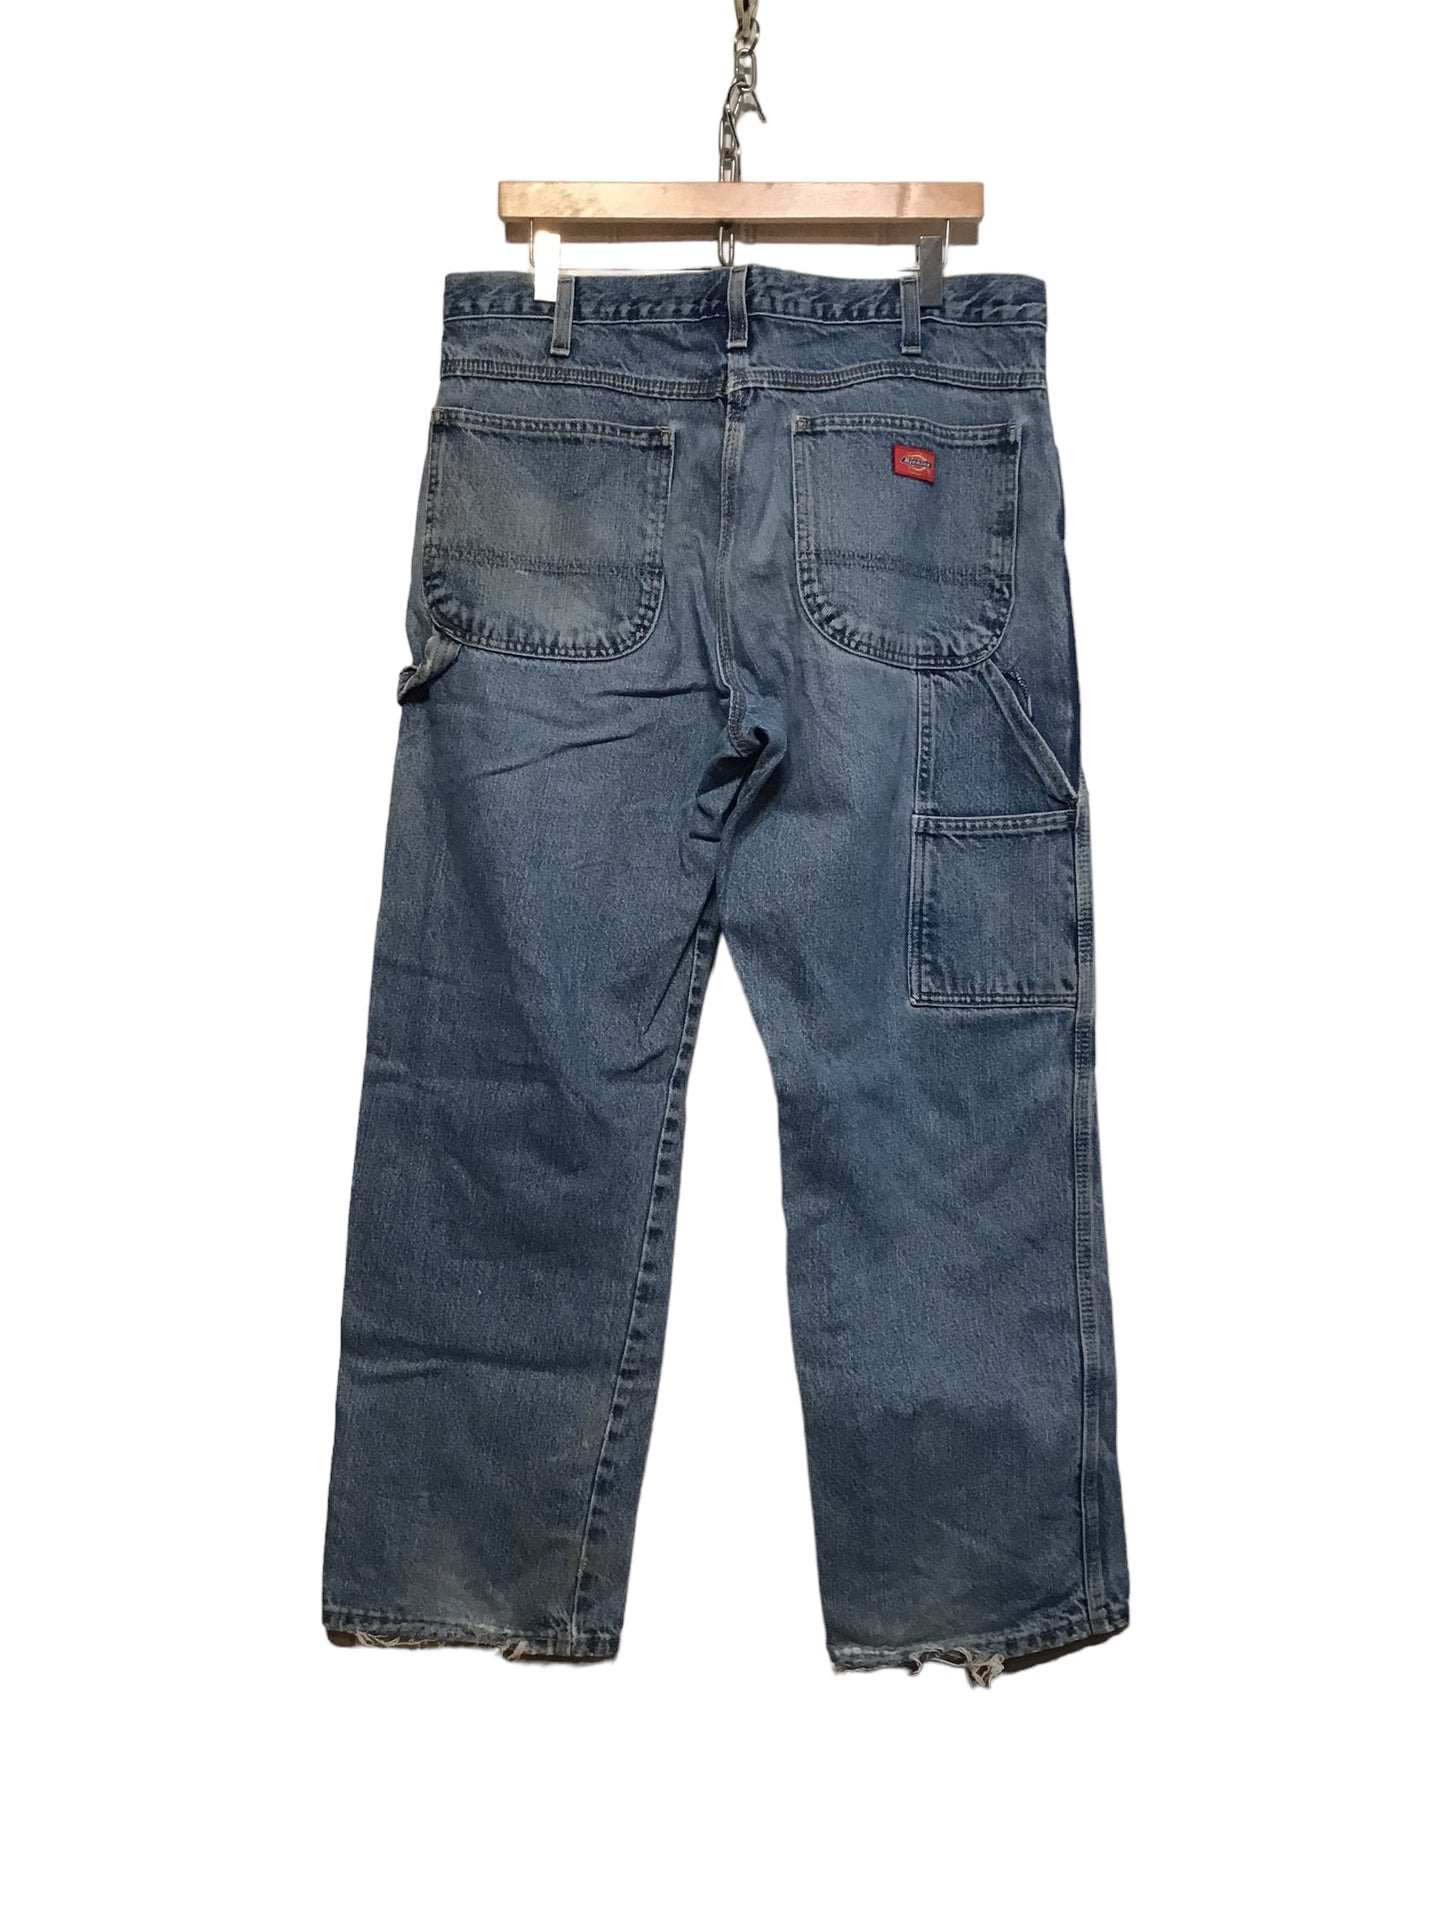 Dickies Relaxed Fit Jeans (36x30)